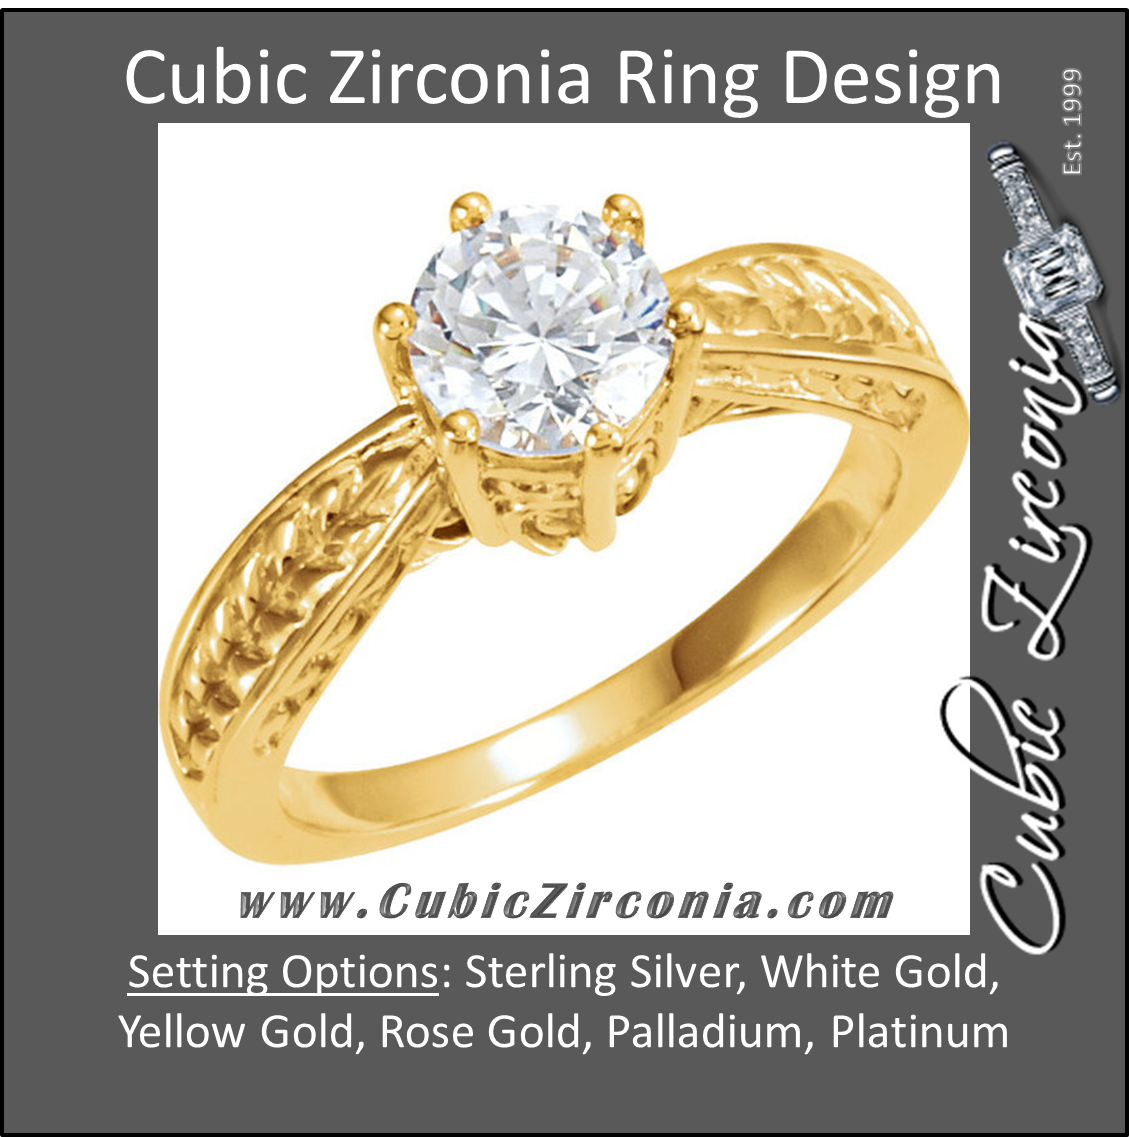 Cubic Zirconia Engagement Ring- The Colleen (0.25-1.0 Carat Round Semi-Solitaire with Flame Channel Band)